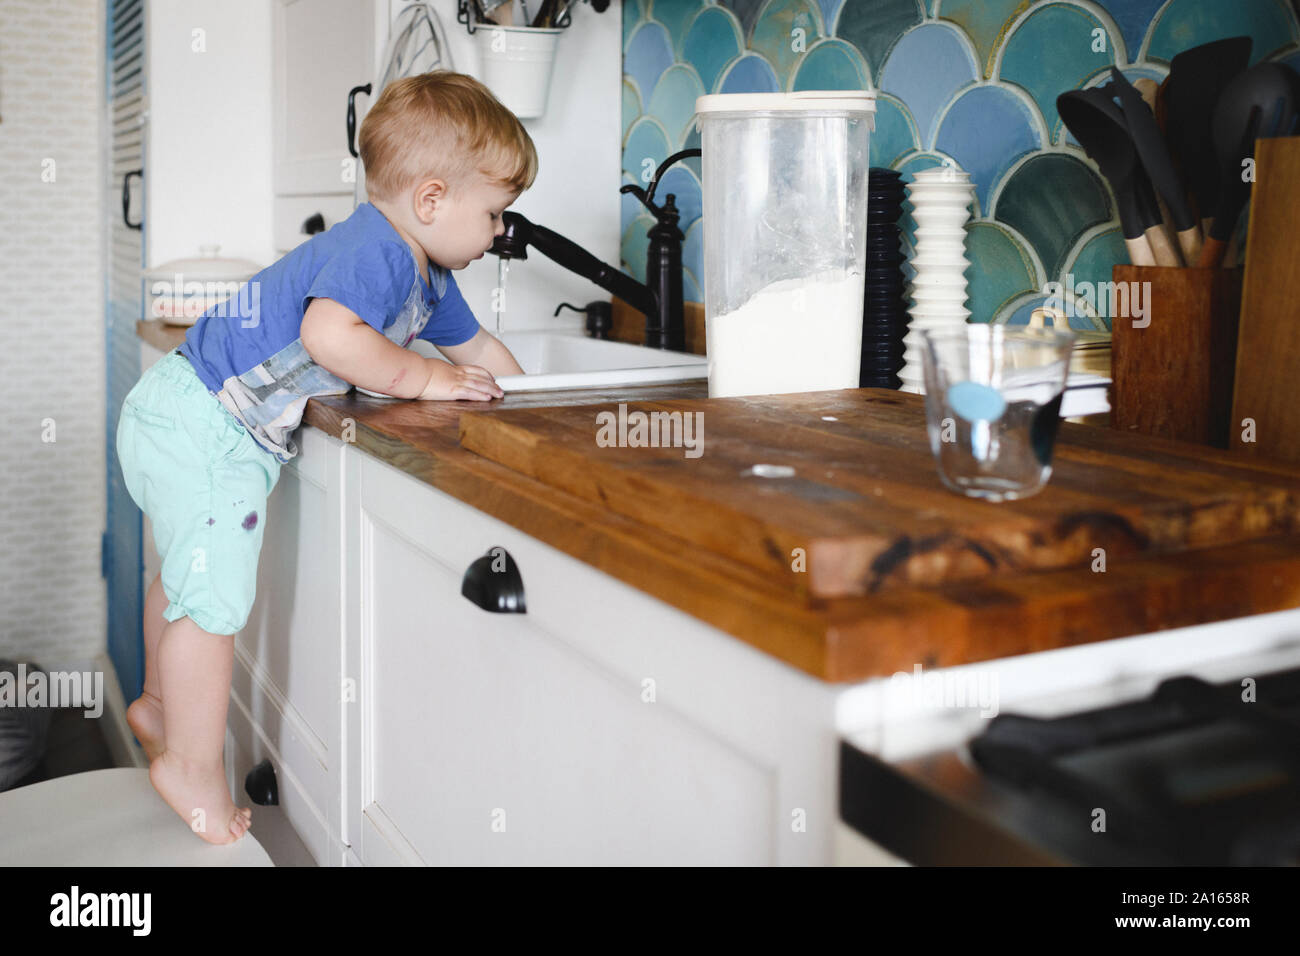 Little boy standing on tiptoes on chair in kitchen washing dishes Stock Photo